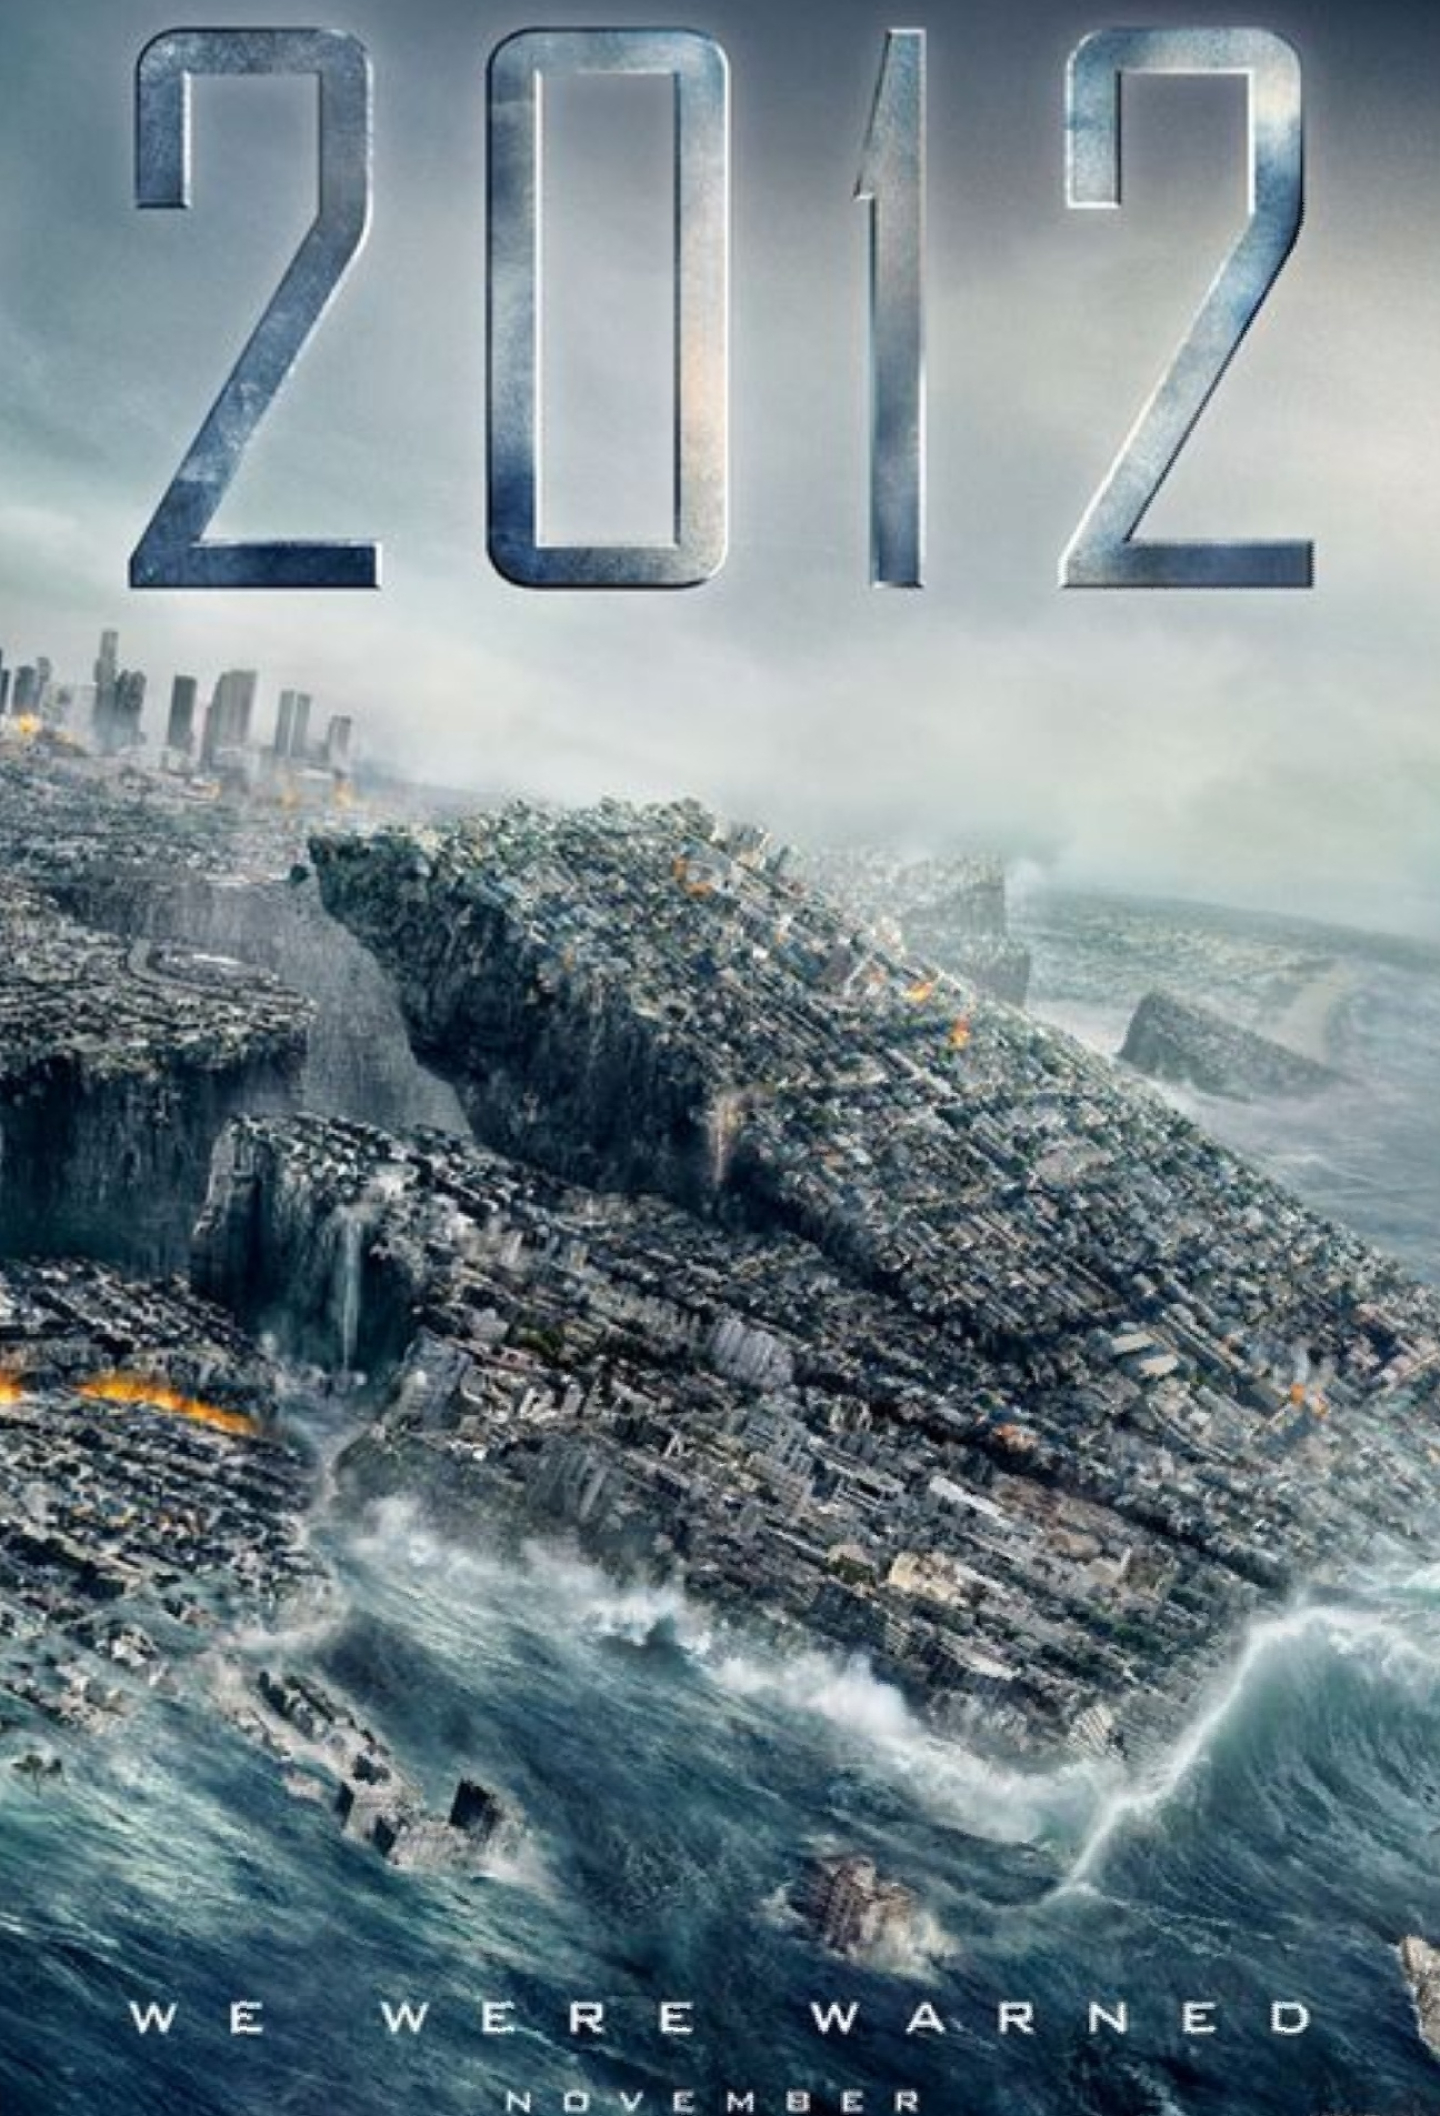 Plot of the movie 2012, Predicted by Aztecs, 1440x2120 HD Handy